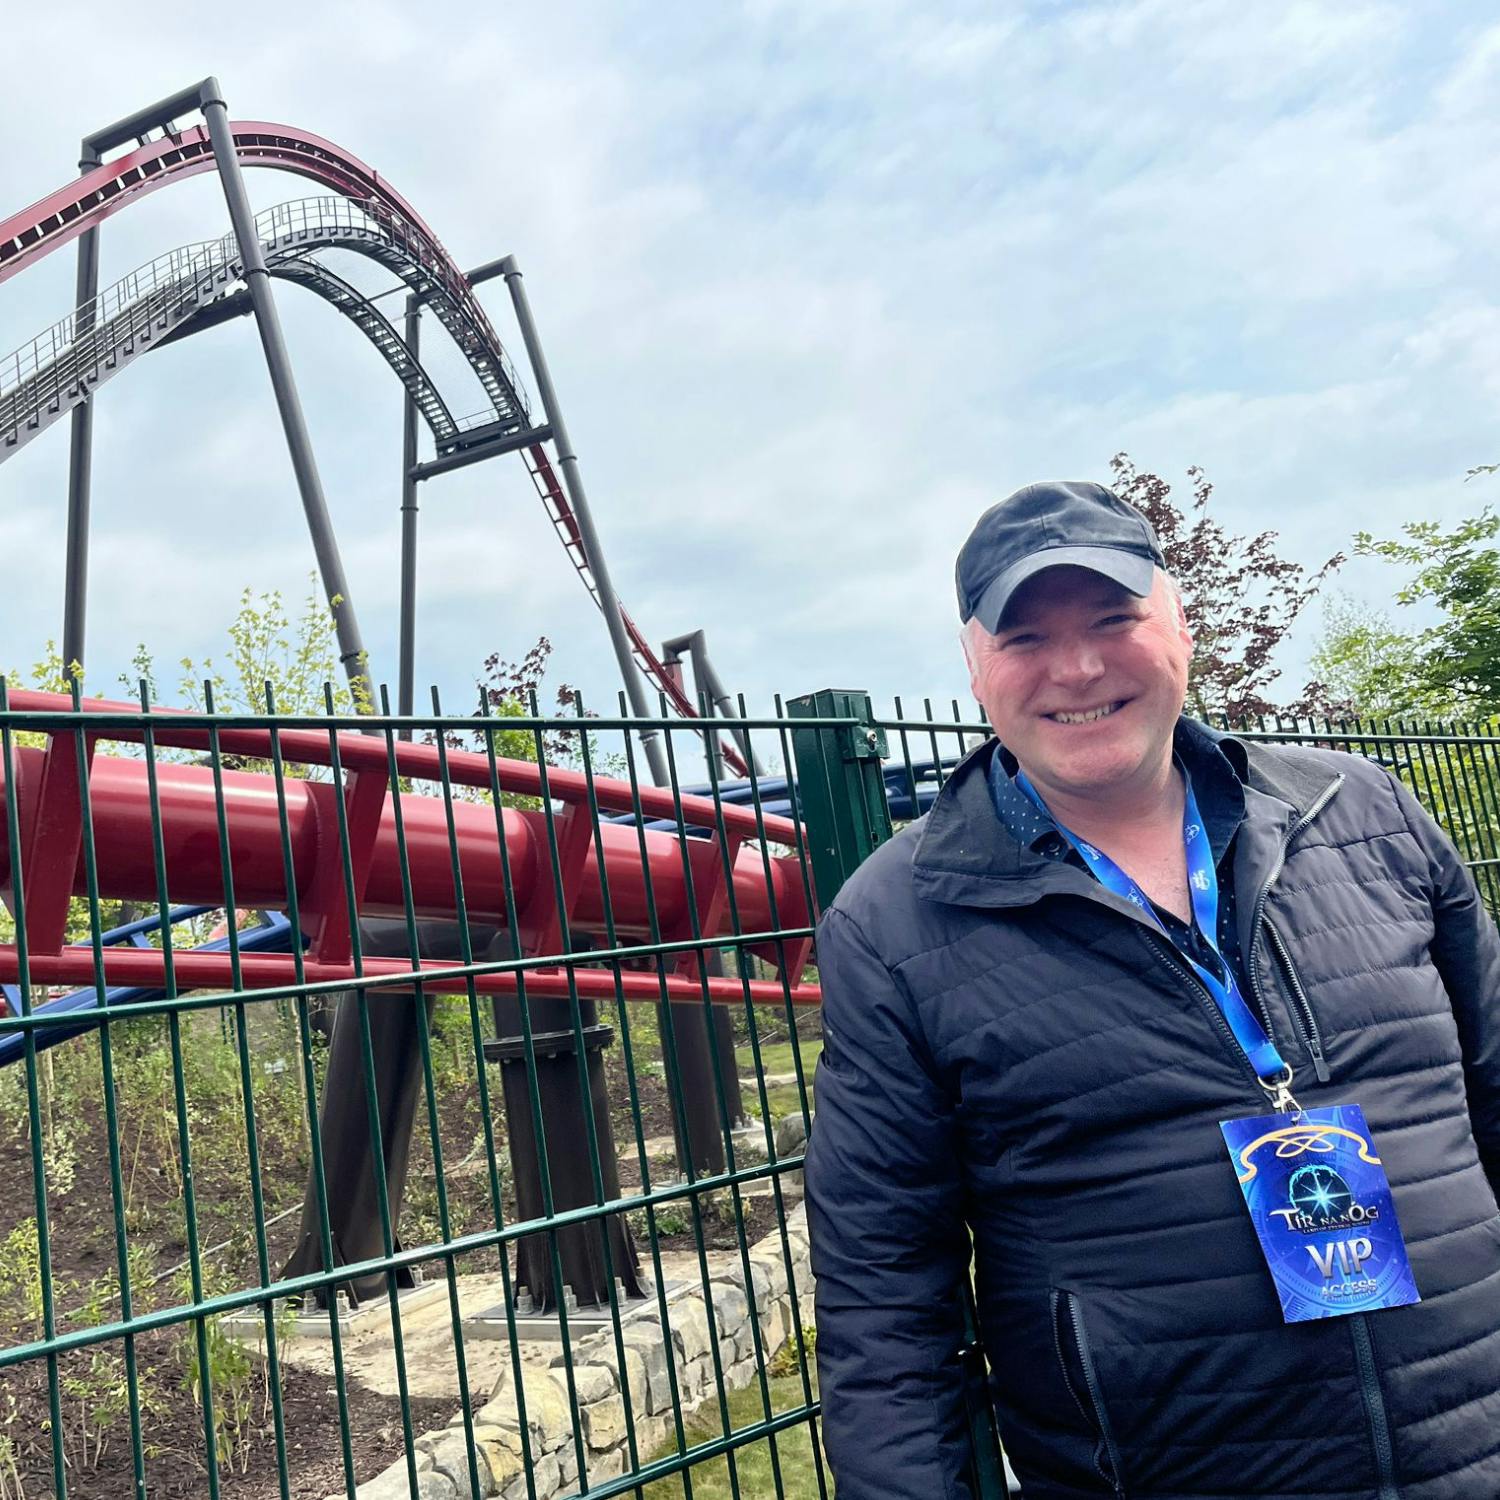 Tír na nÓg features two brand new rollercoasters to Emerald Park